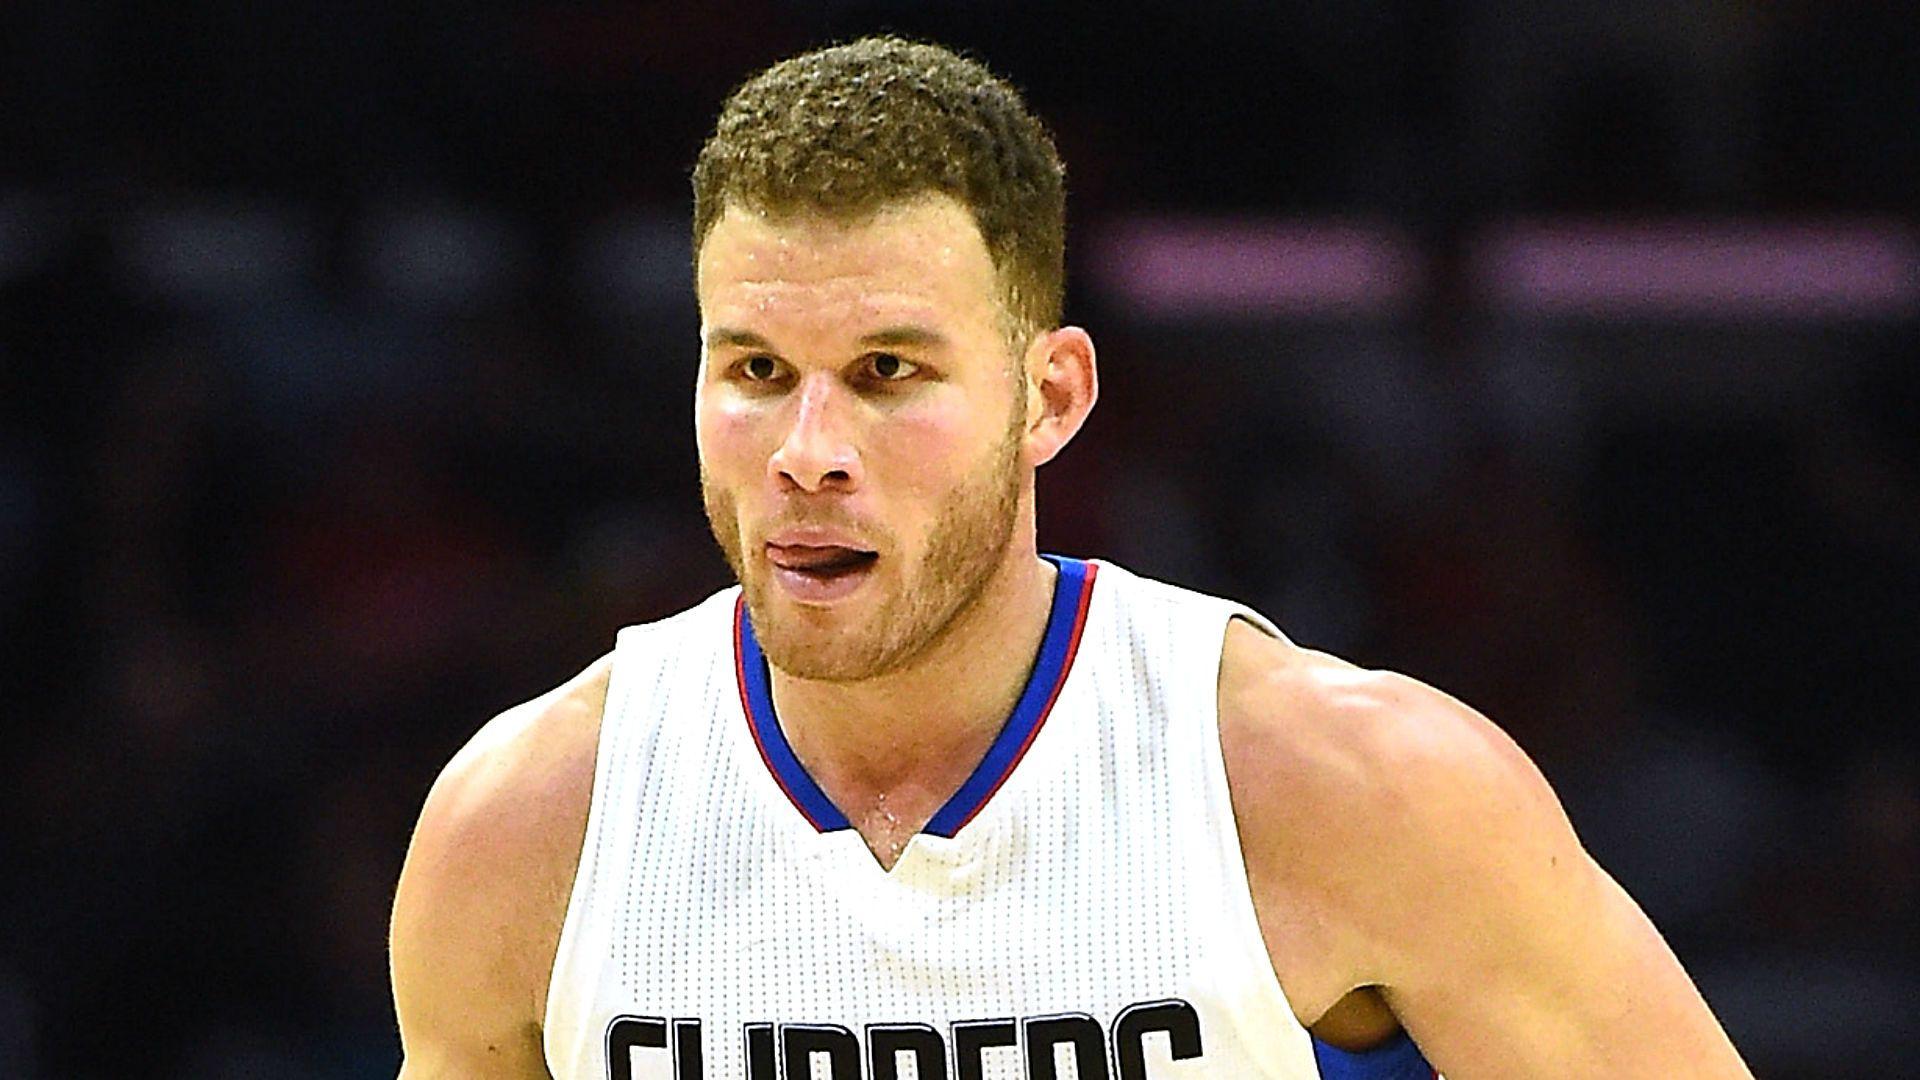 Clippers' Blake Griffin flies high again with poster dunk over